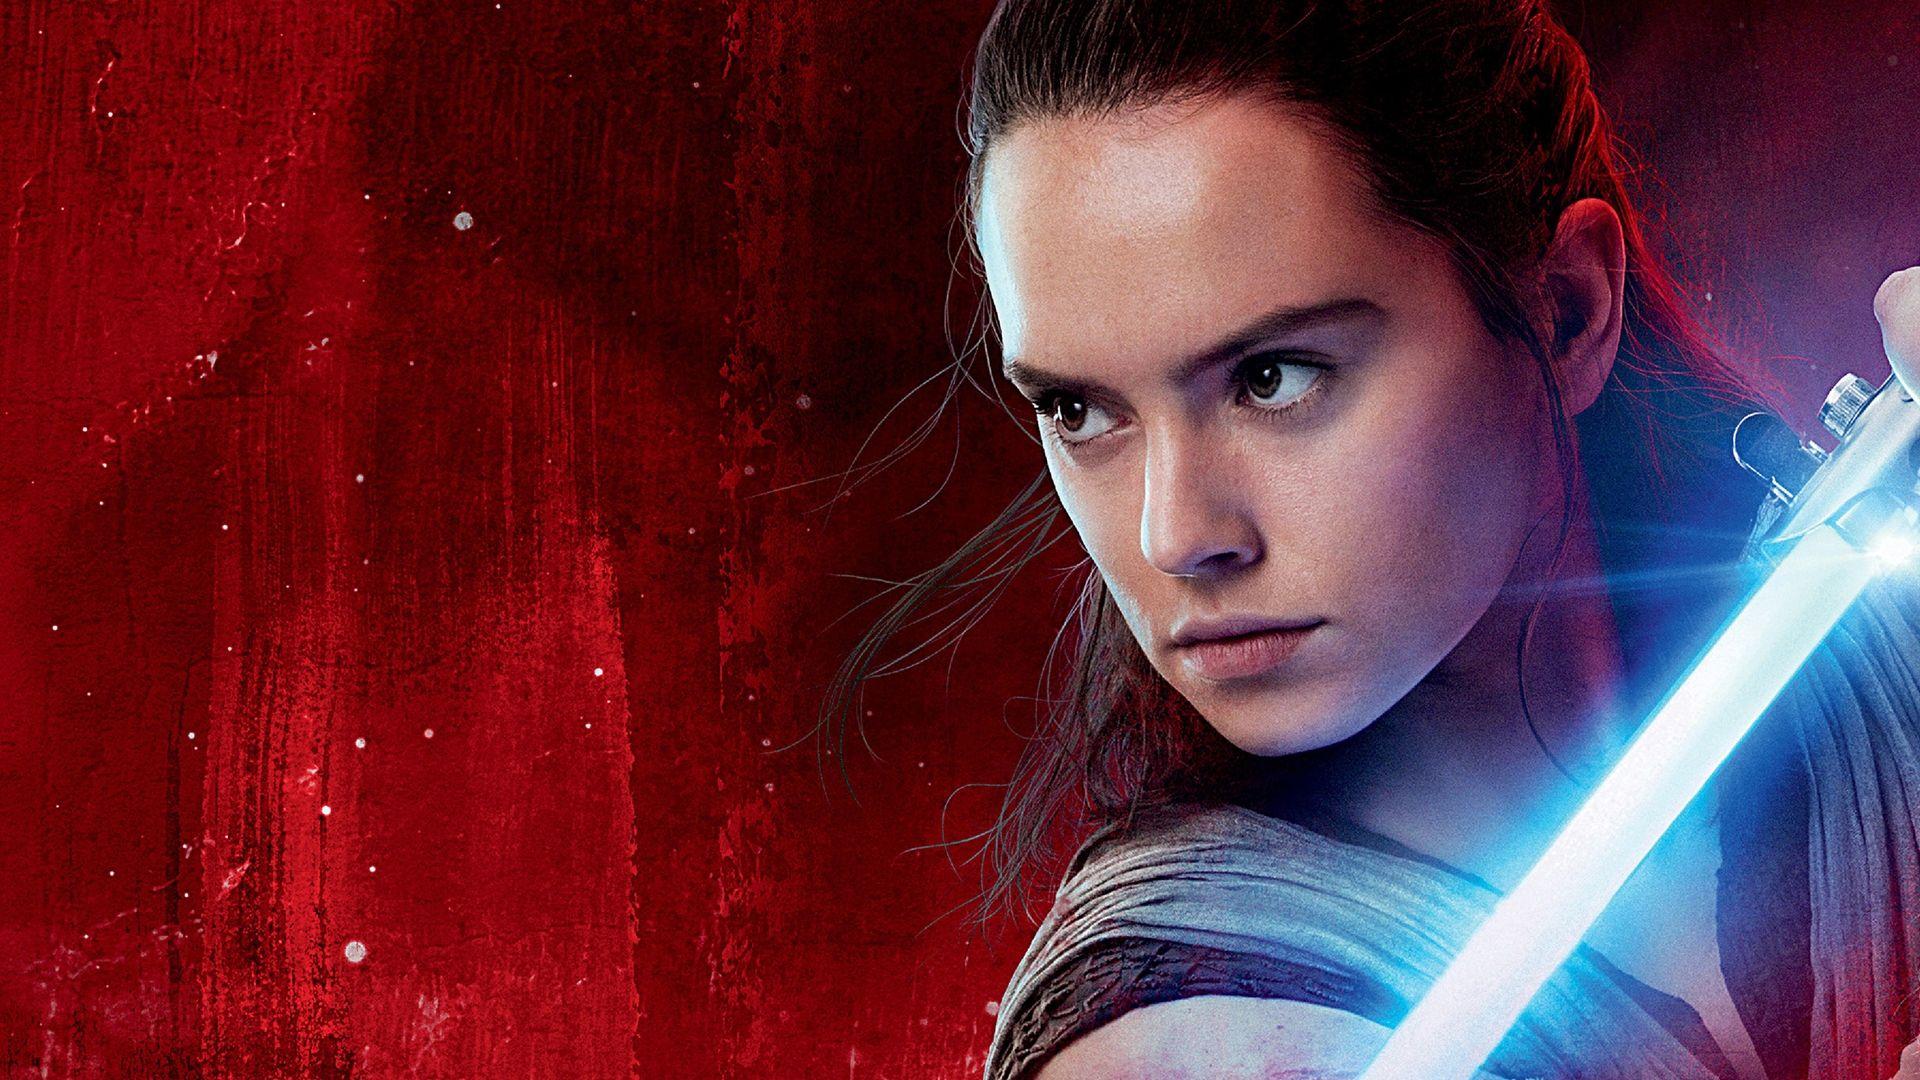 Rey Lightsaber Full HD Wallpaper and Background Imagex1080